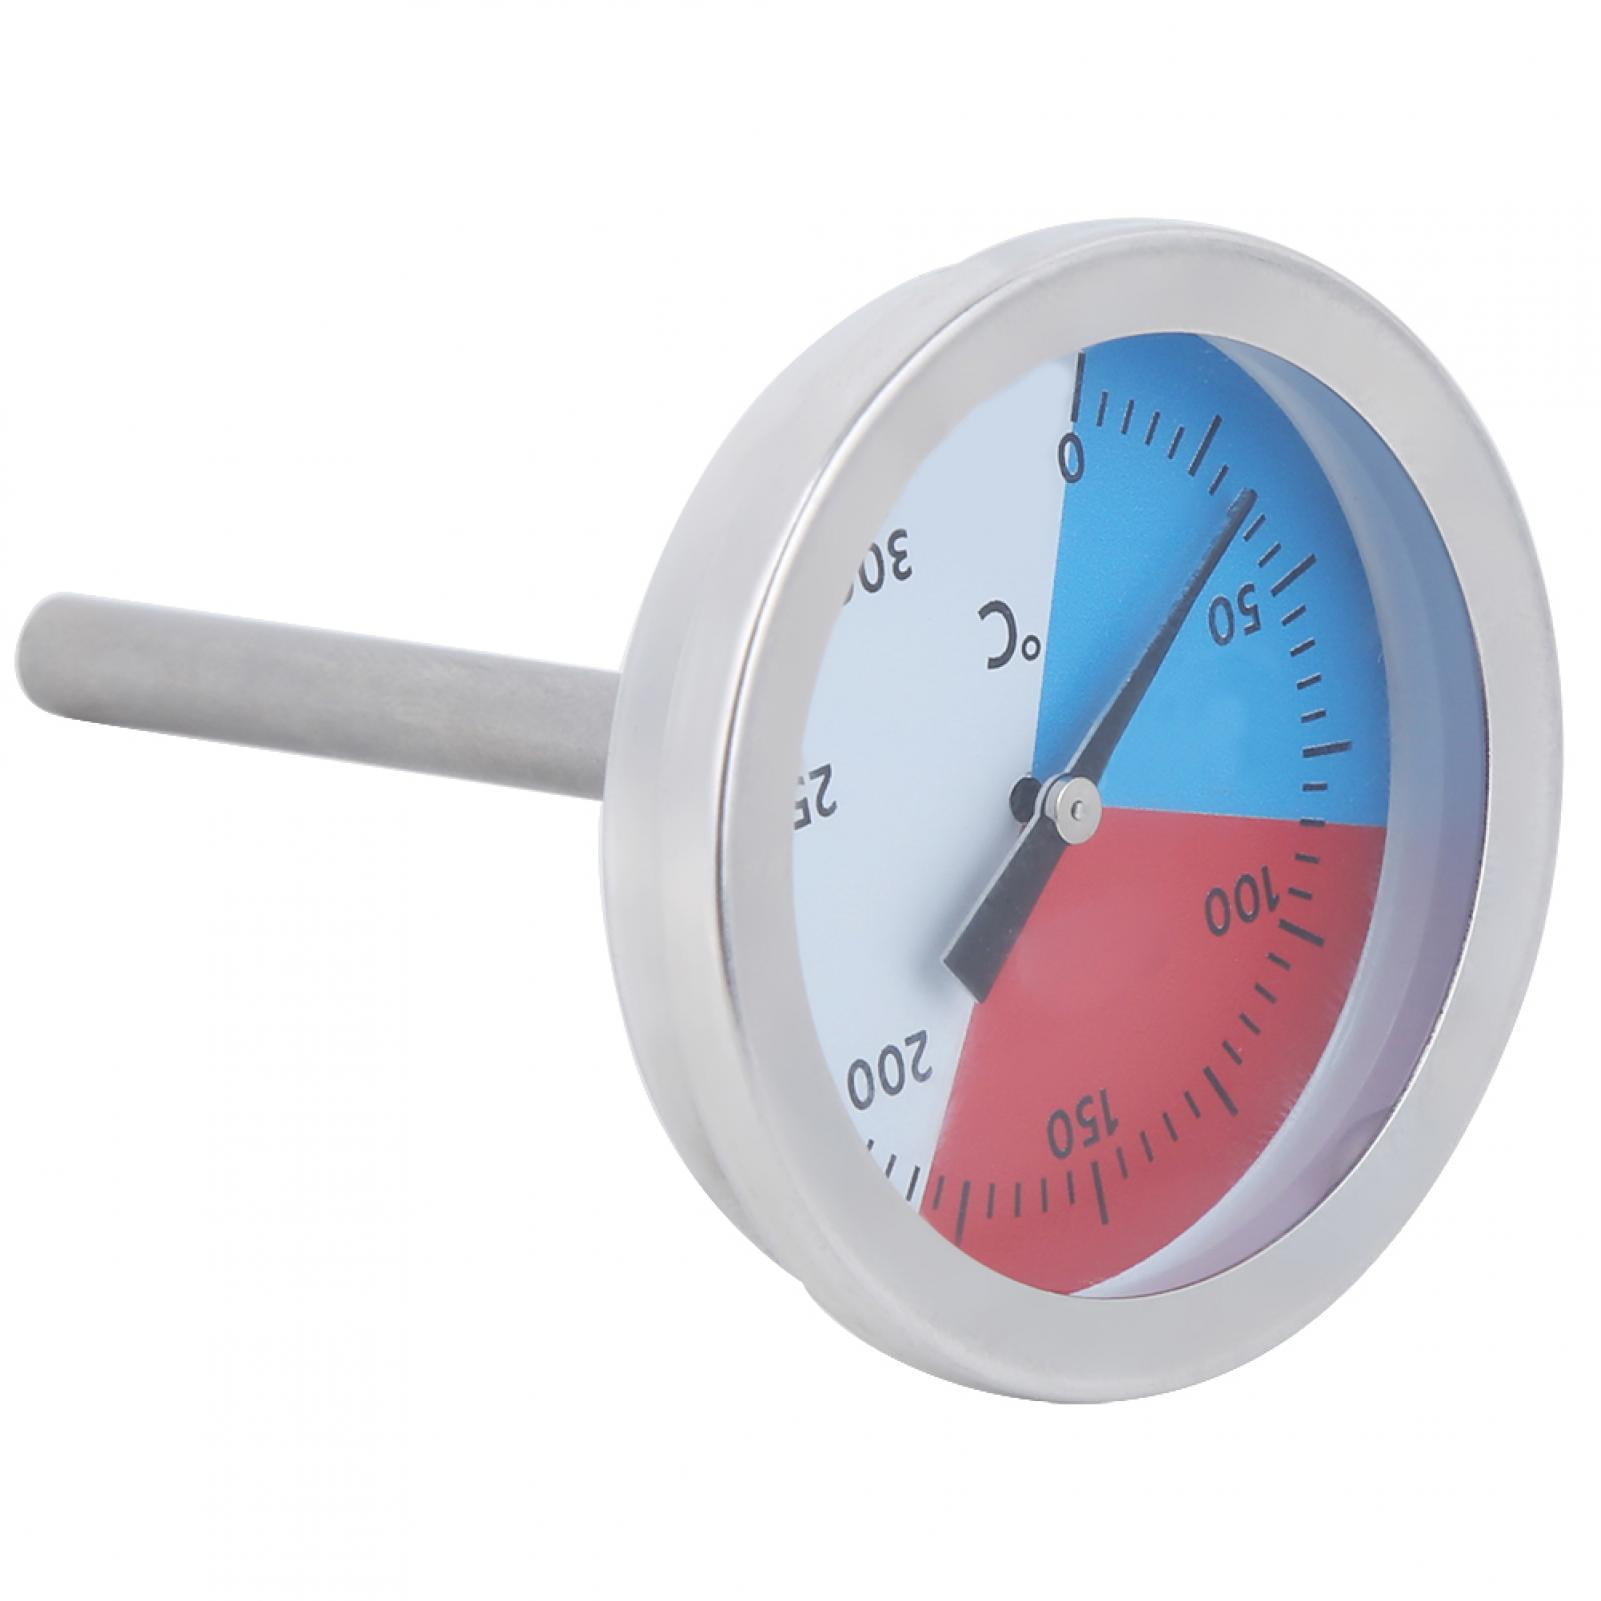 Stainless Steel Oven Cooker Thermometer Temperature Gauge 0-300 °C Durable